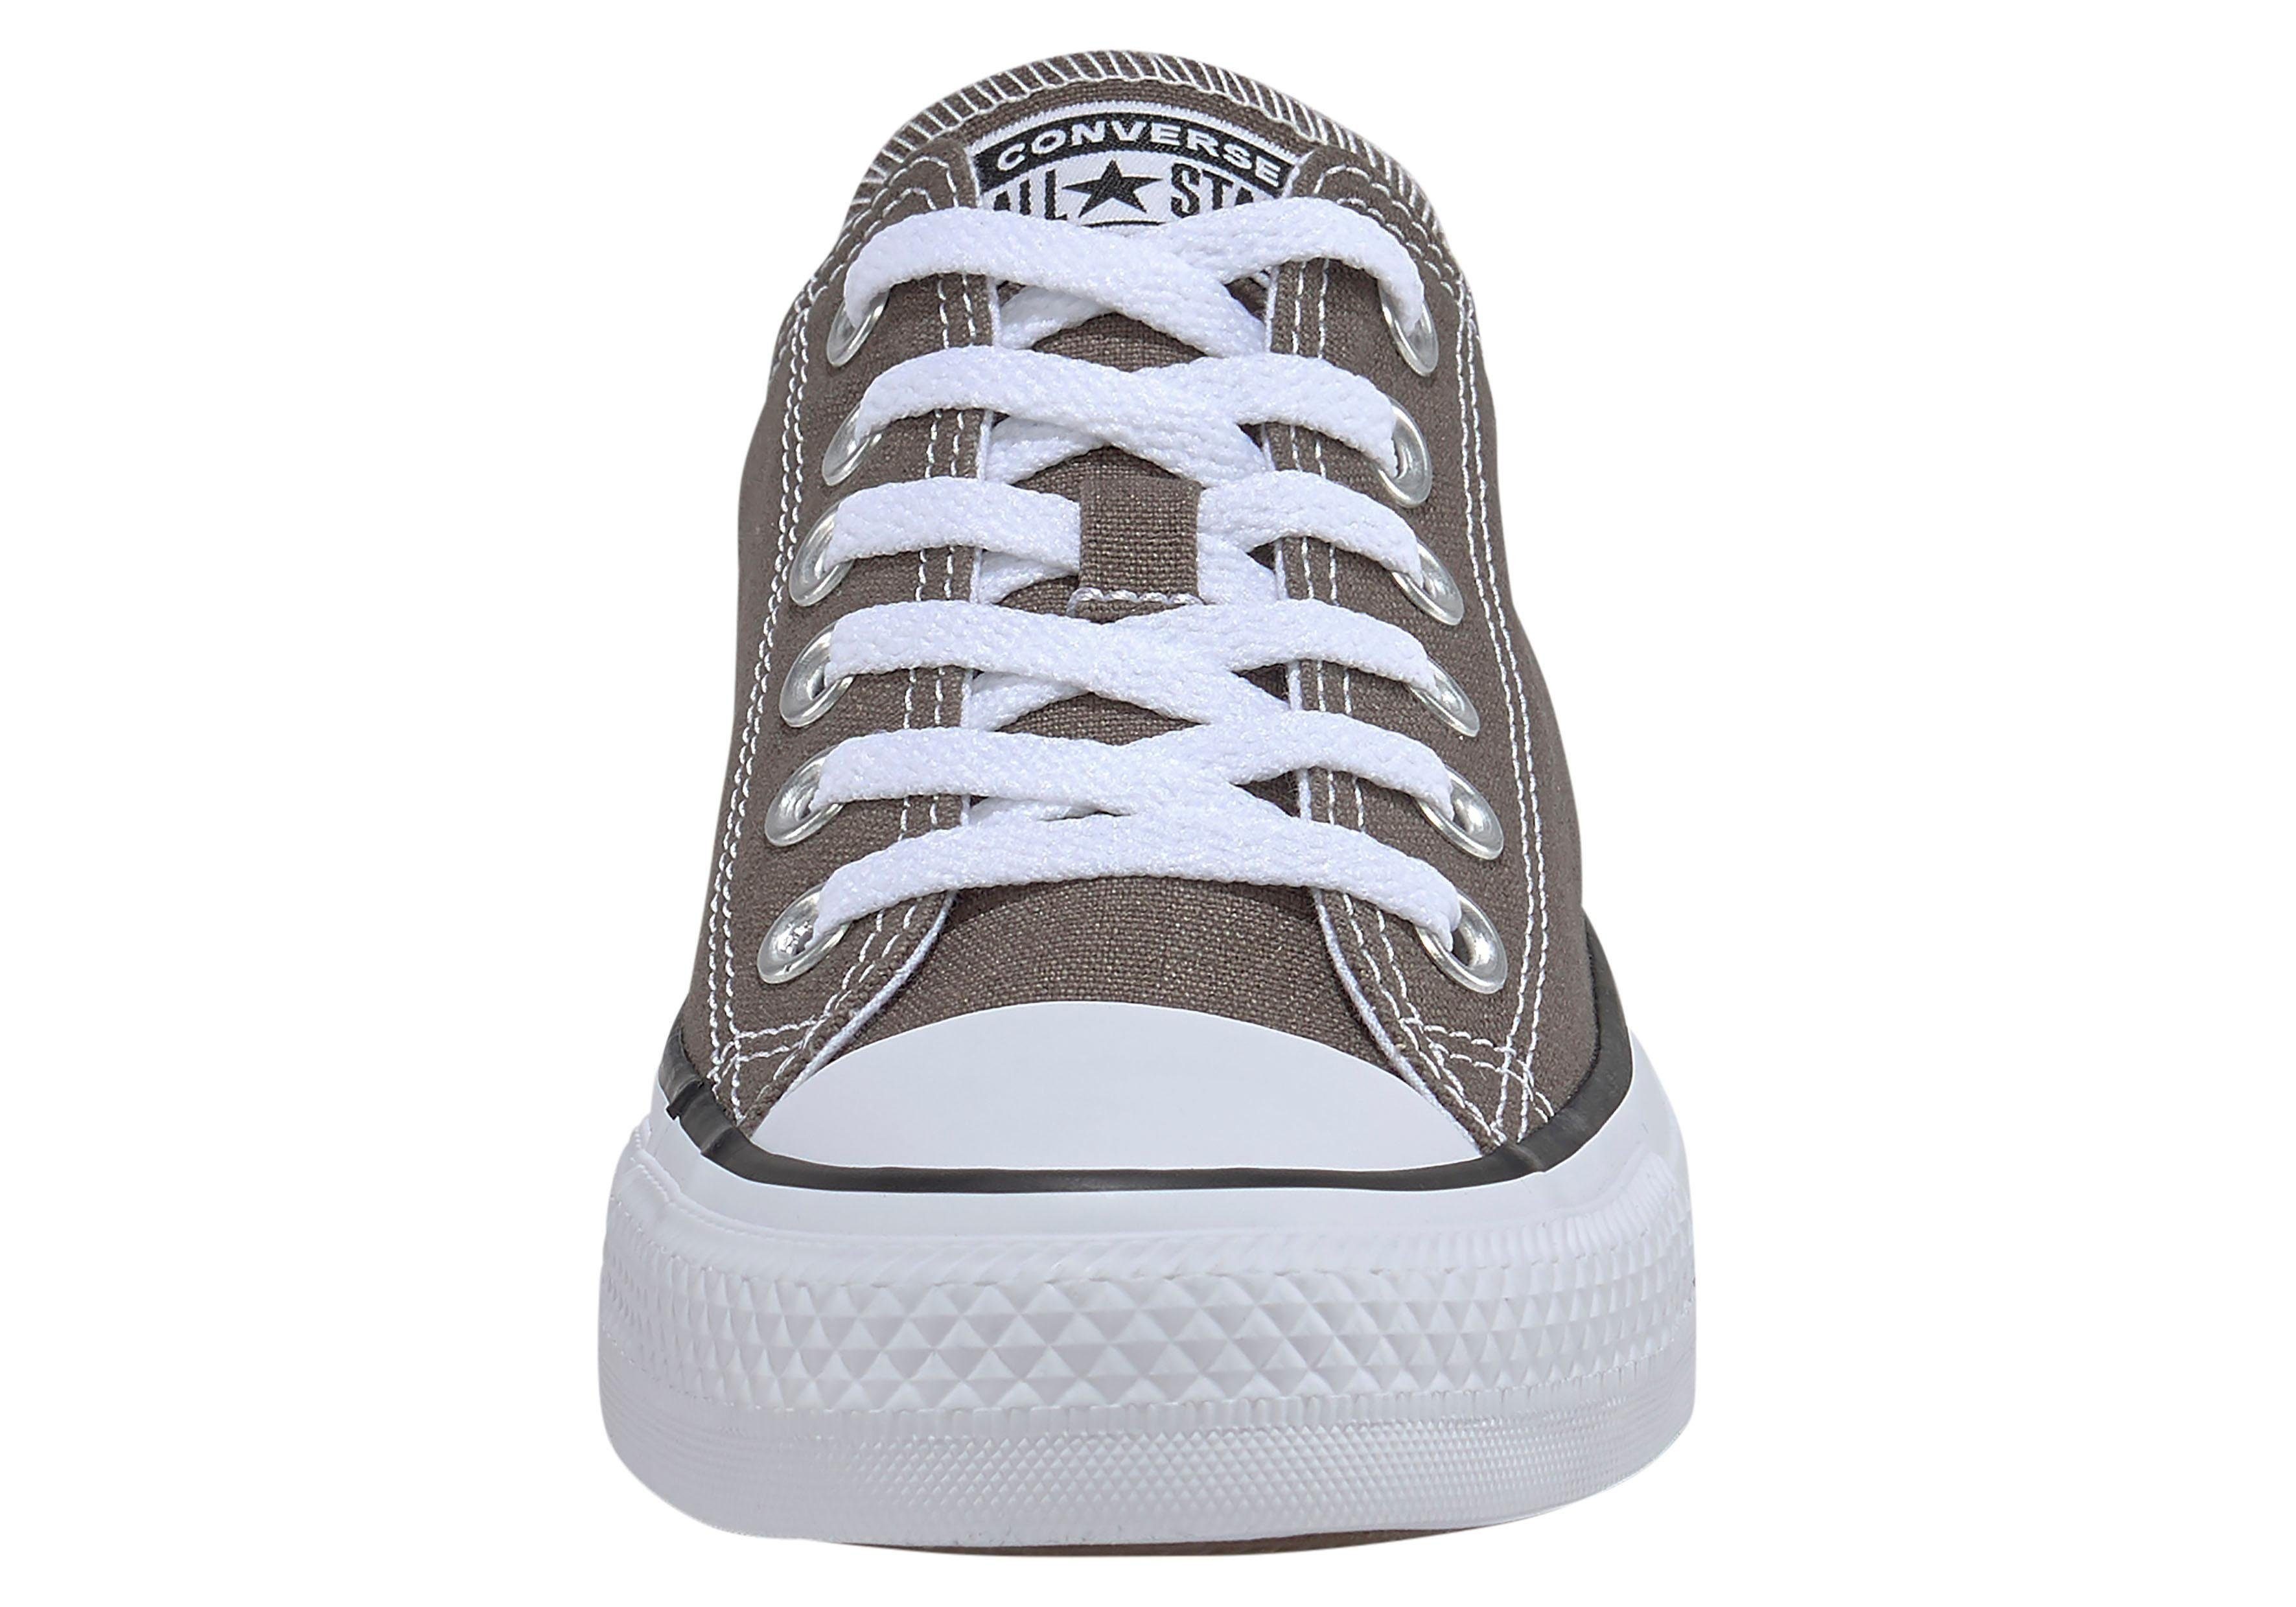 Converse Chuck Taylor All Star Ox Charcoal Core Sneaker